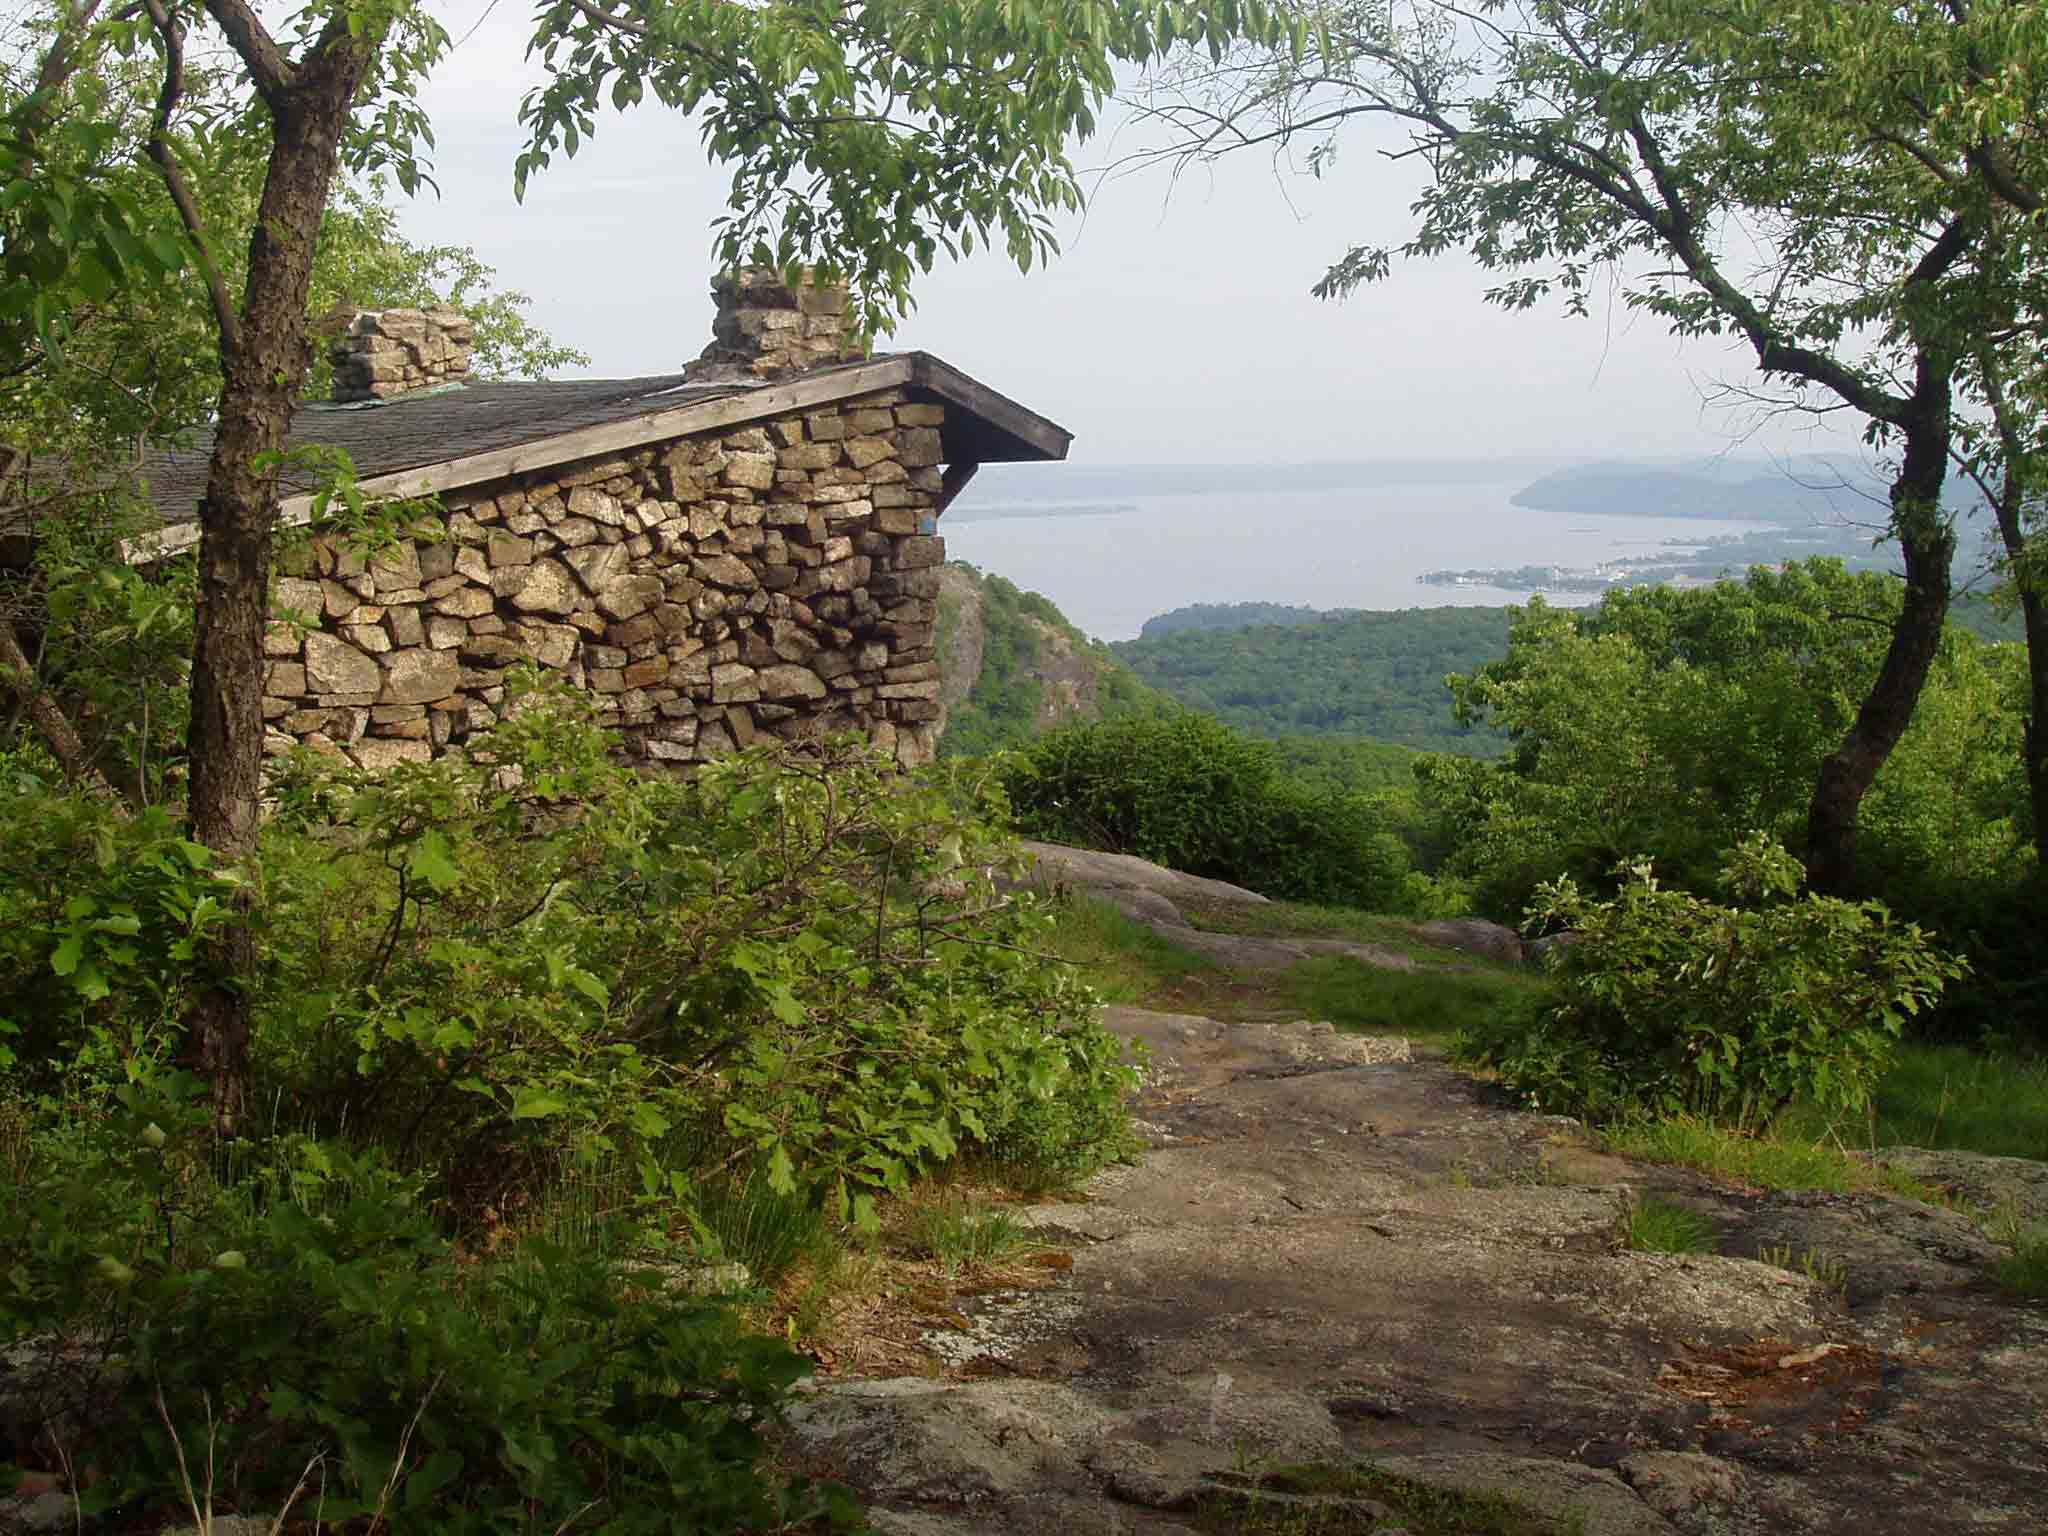 West Mountain Shelter 0.6 miles off the AT on the blue-blazed Timp-Torne Trail which diverges from the AT at MM 6.8. Beautiful southern view of the Hudson River Valley. Bring water, no water here.  Courtesy froto